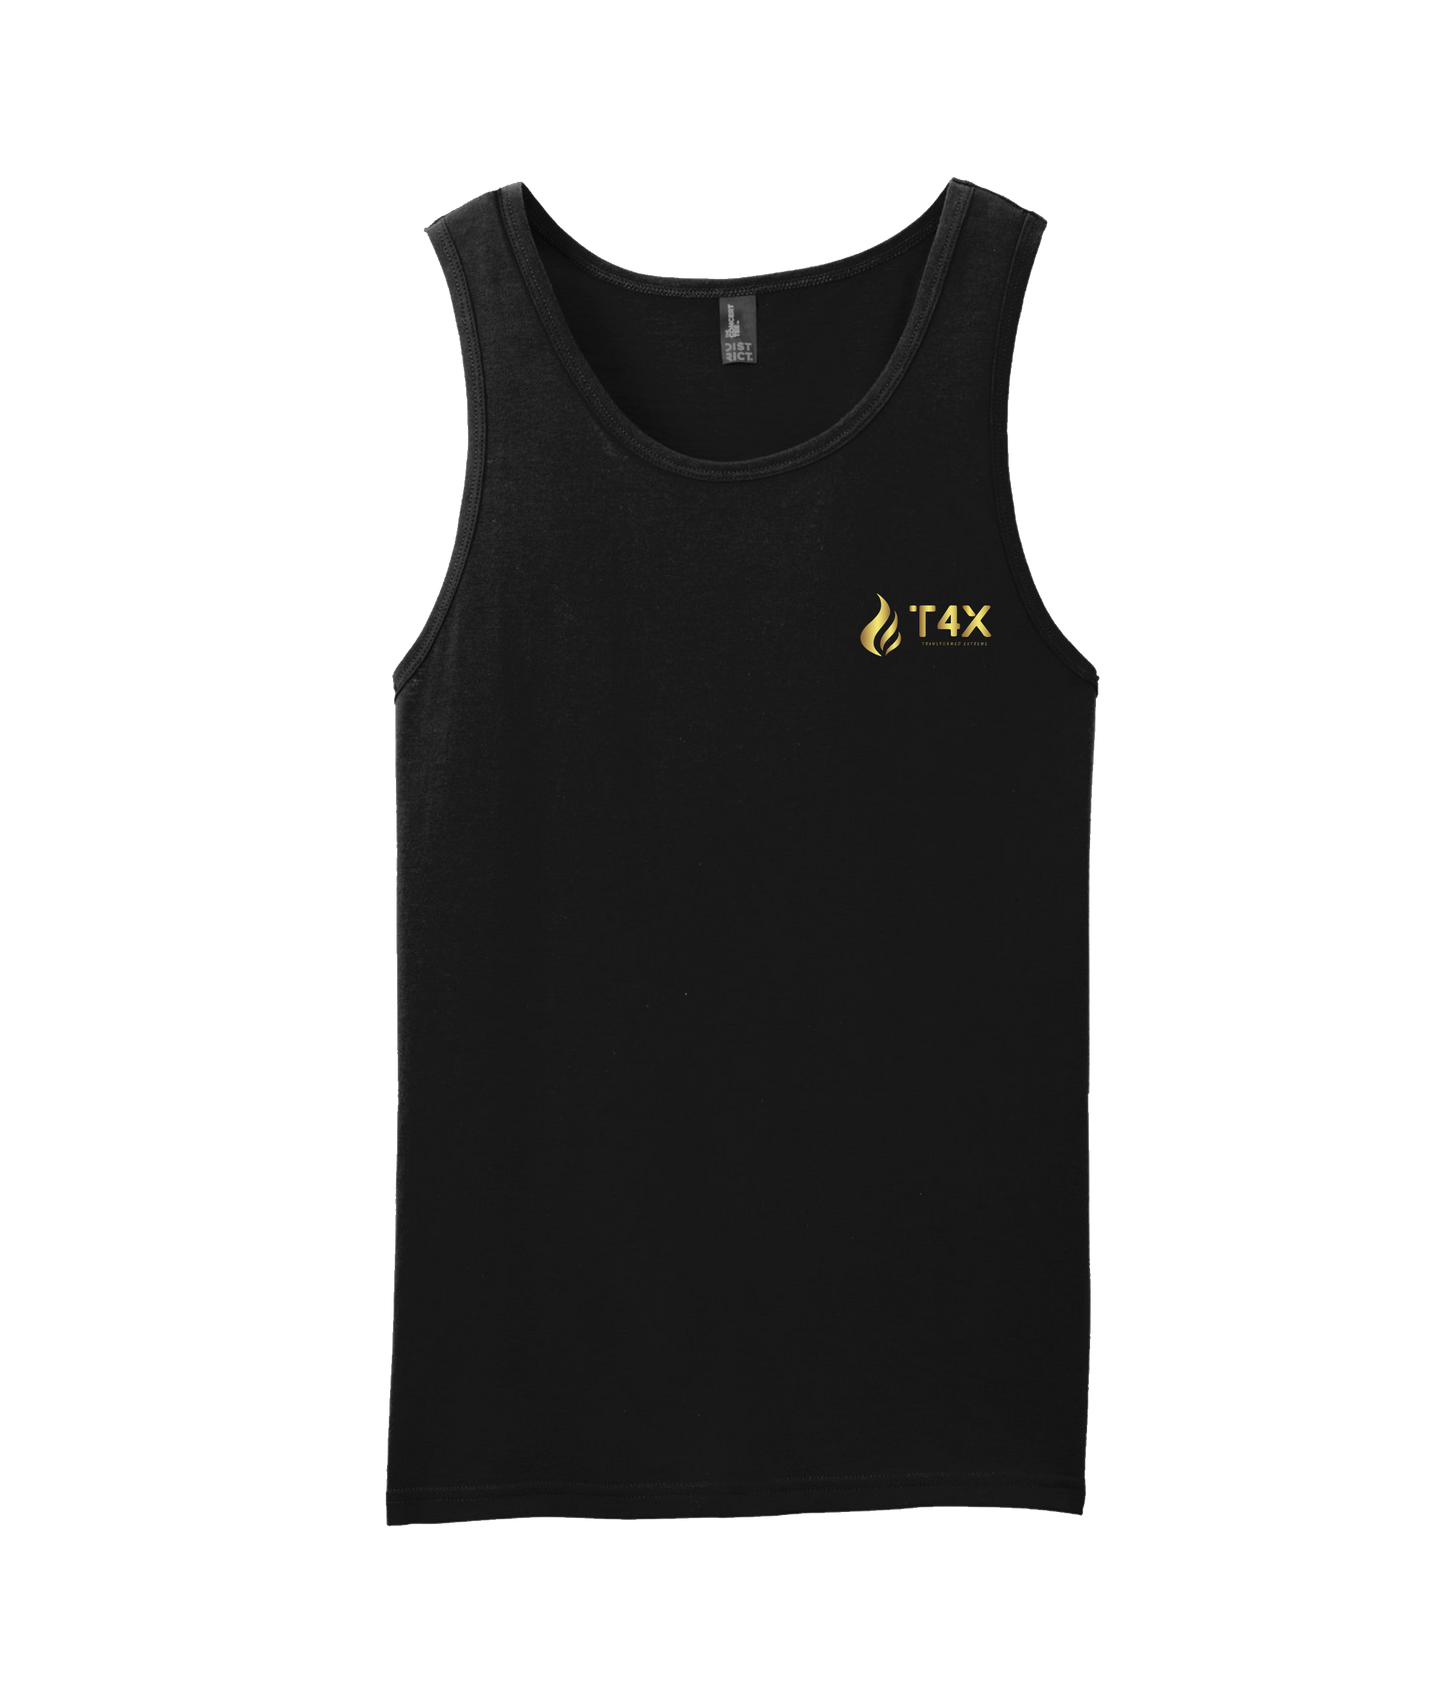 T4E (Trans4ormed Extreme) - GOLD FLAME - Black Tank Top